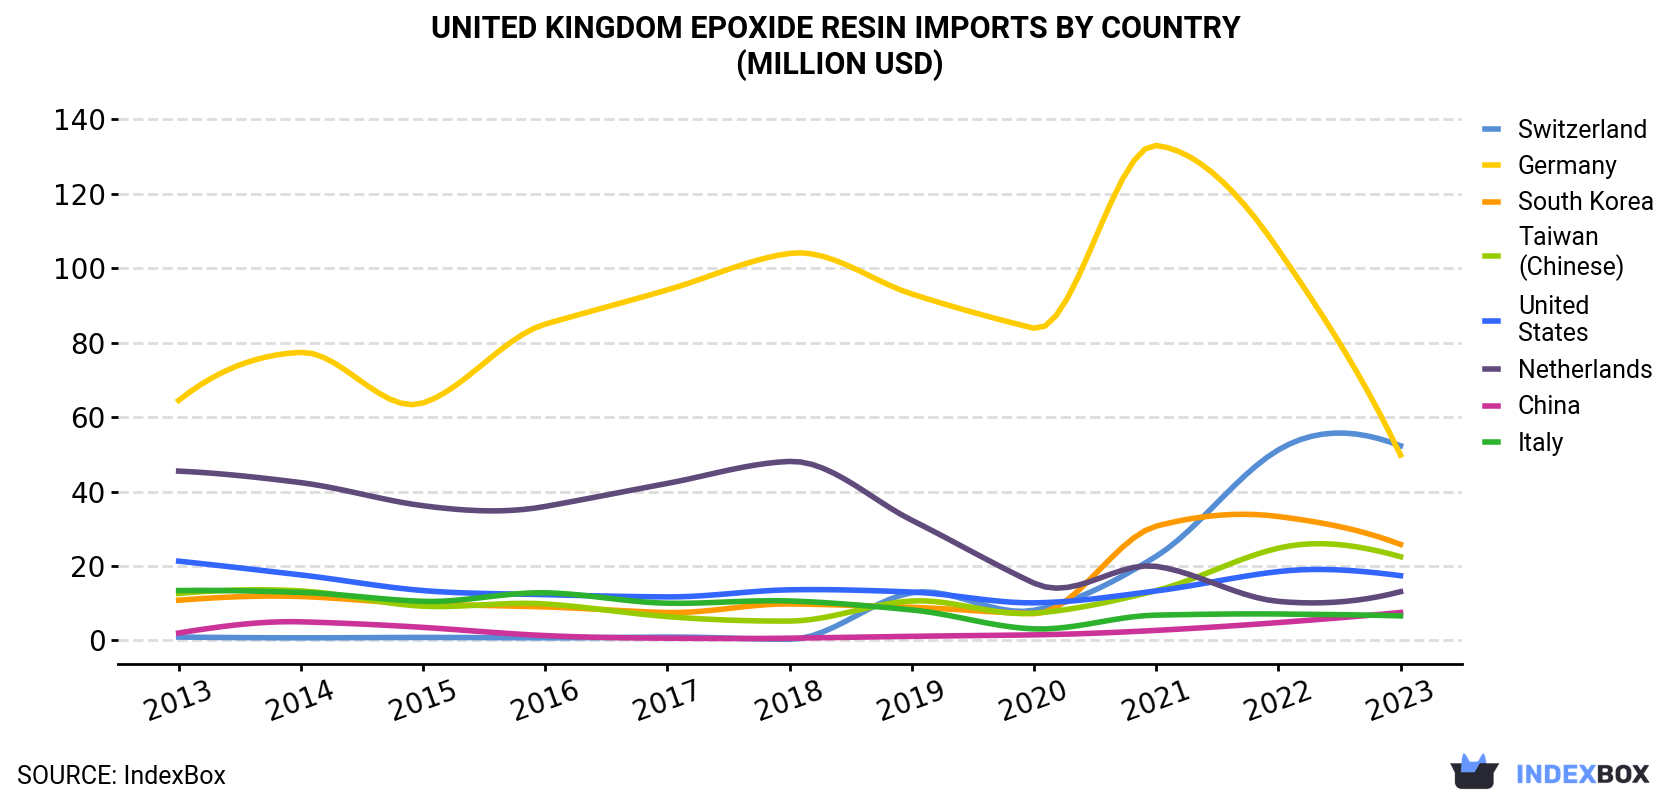 United Kingdom Epoxide Resin Imports By Country (Million USD)